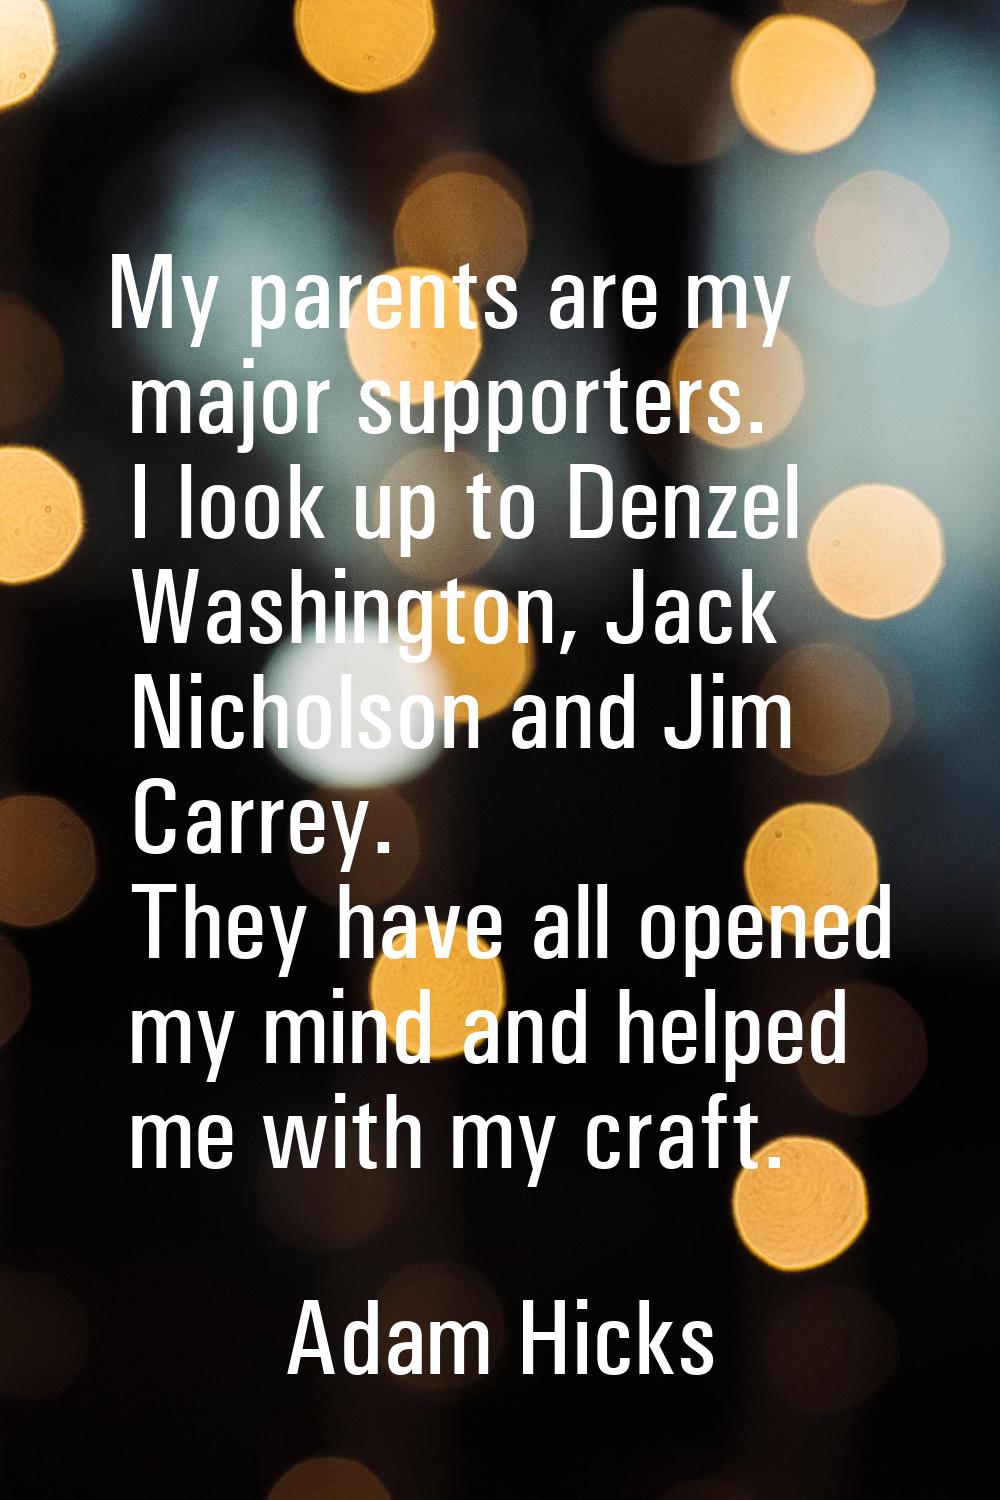 My parents are my major supporters. I look up to Denzel Washington, Jack Nicholson and Jim Carrey. 